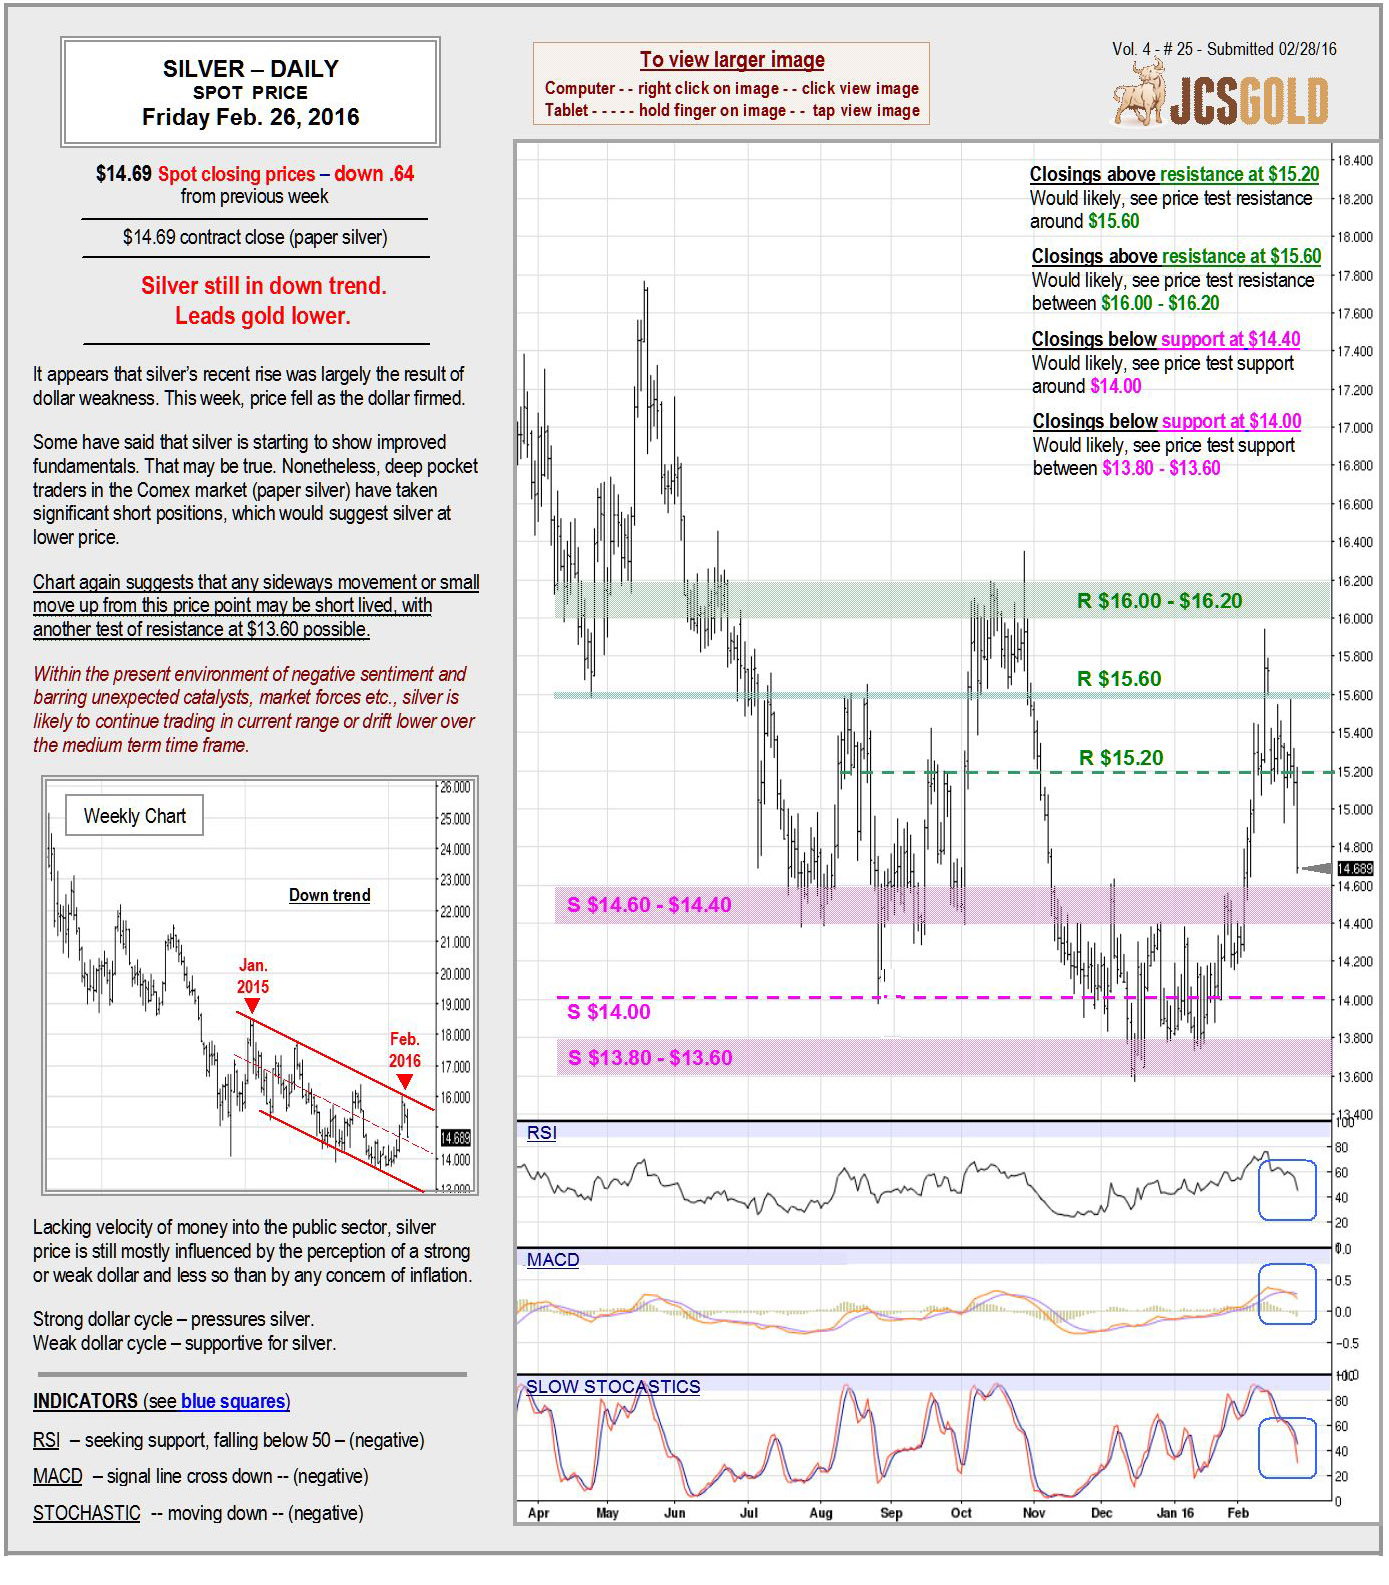 Feb 26, 2016 chart & commentary